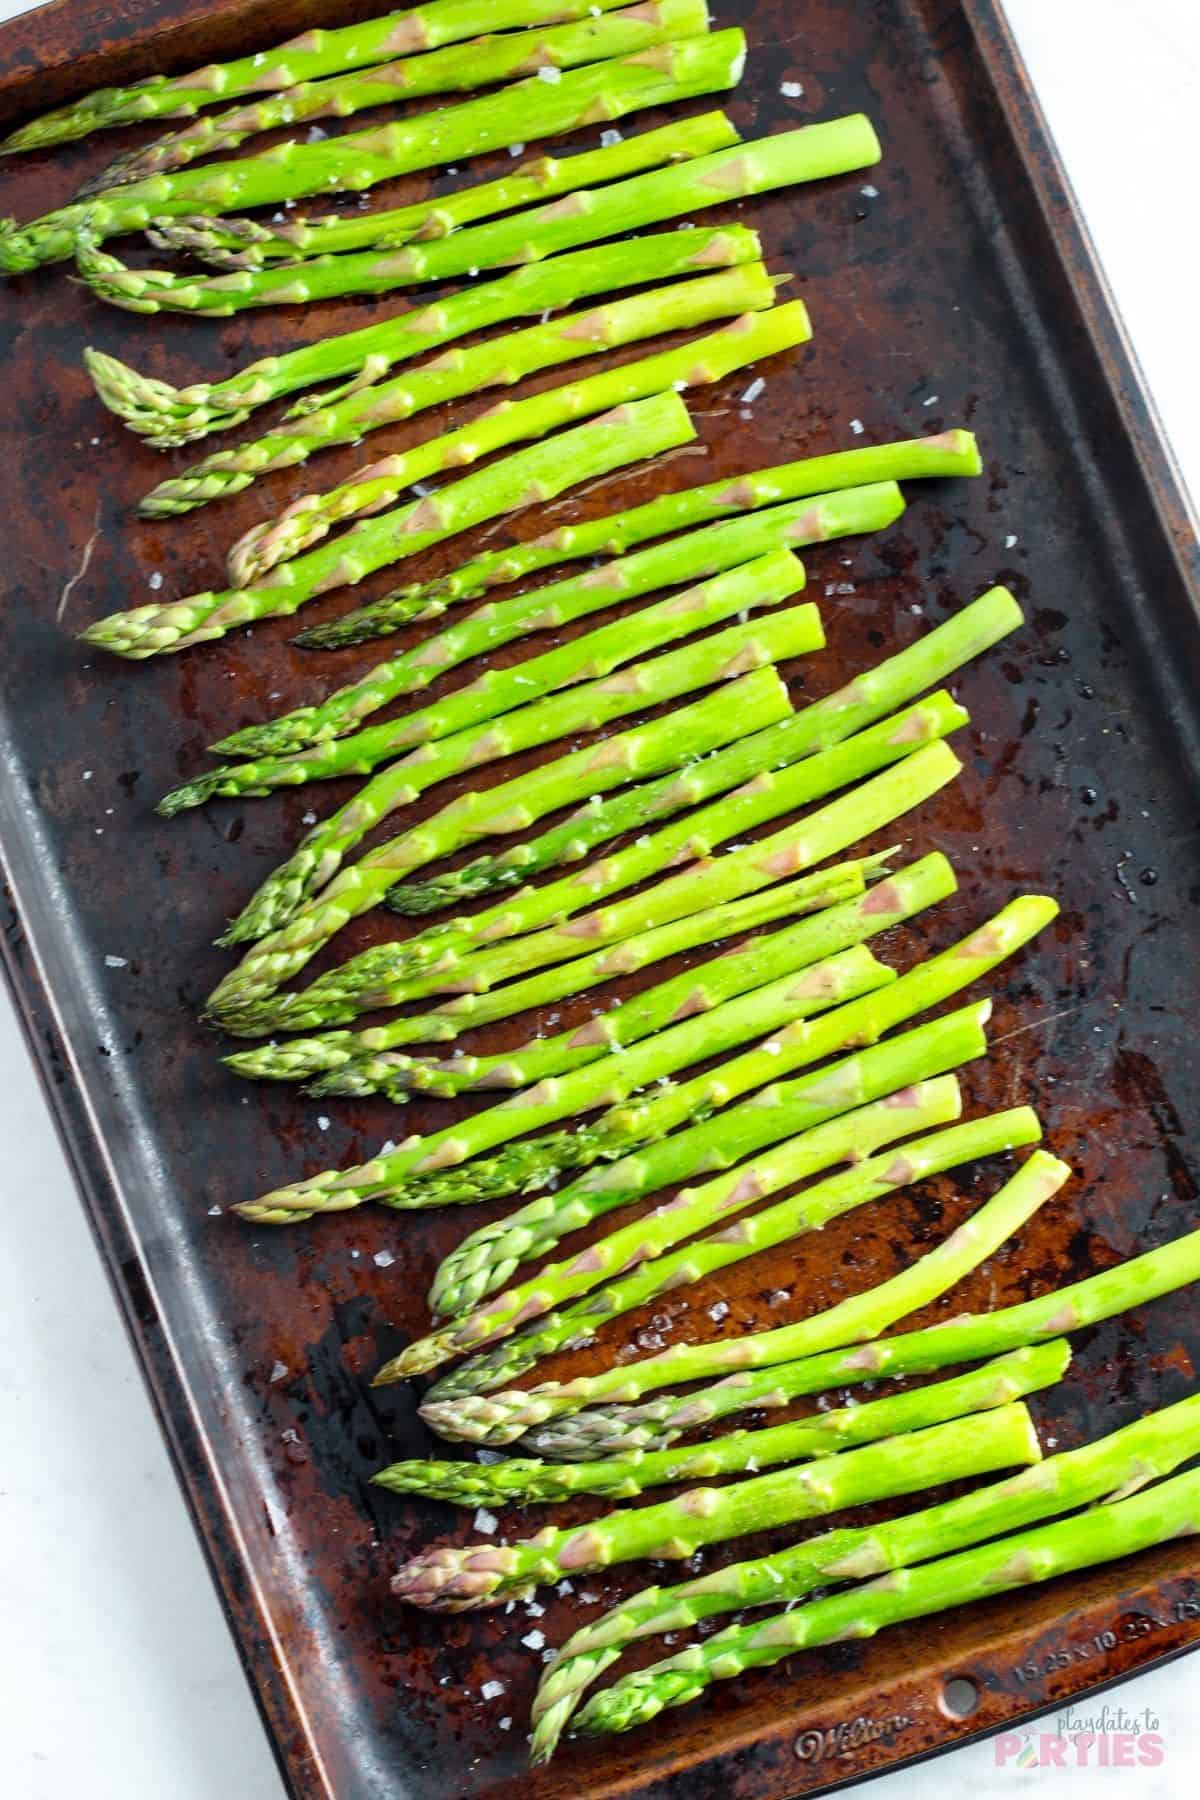 Overhead view of seasoned asparagus spears on a baking sheet.